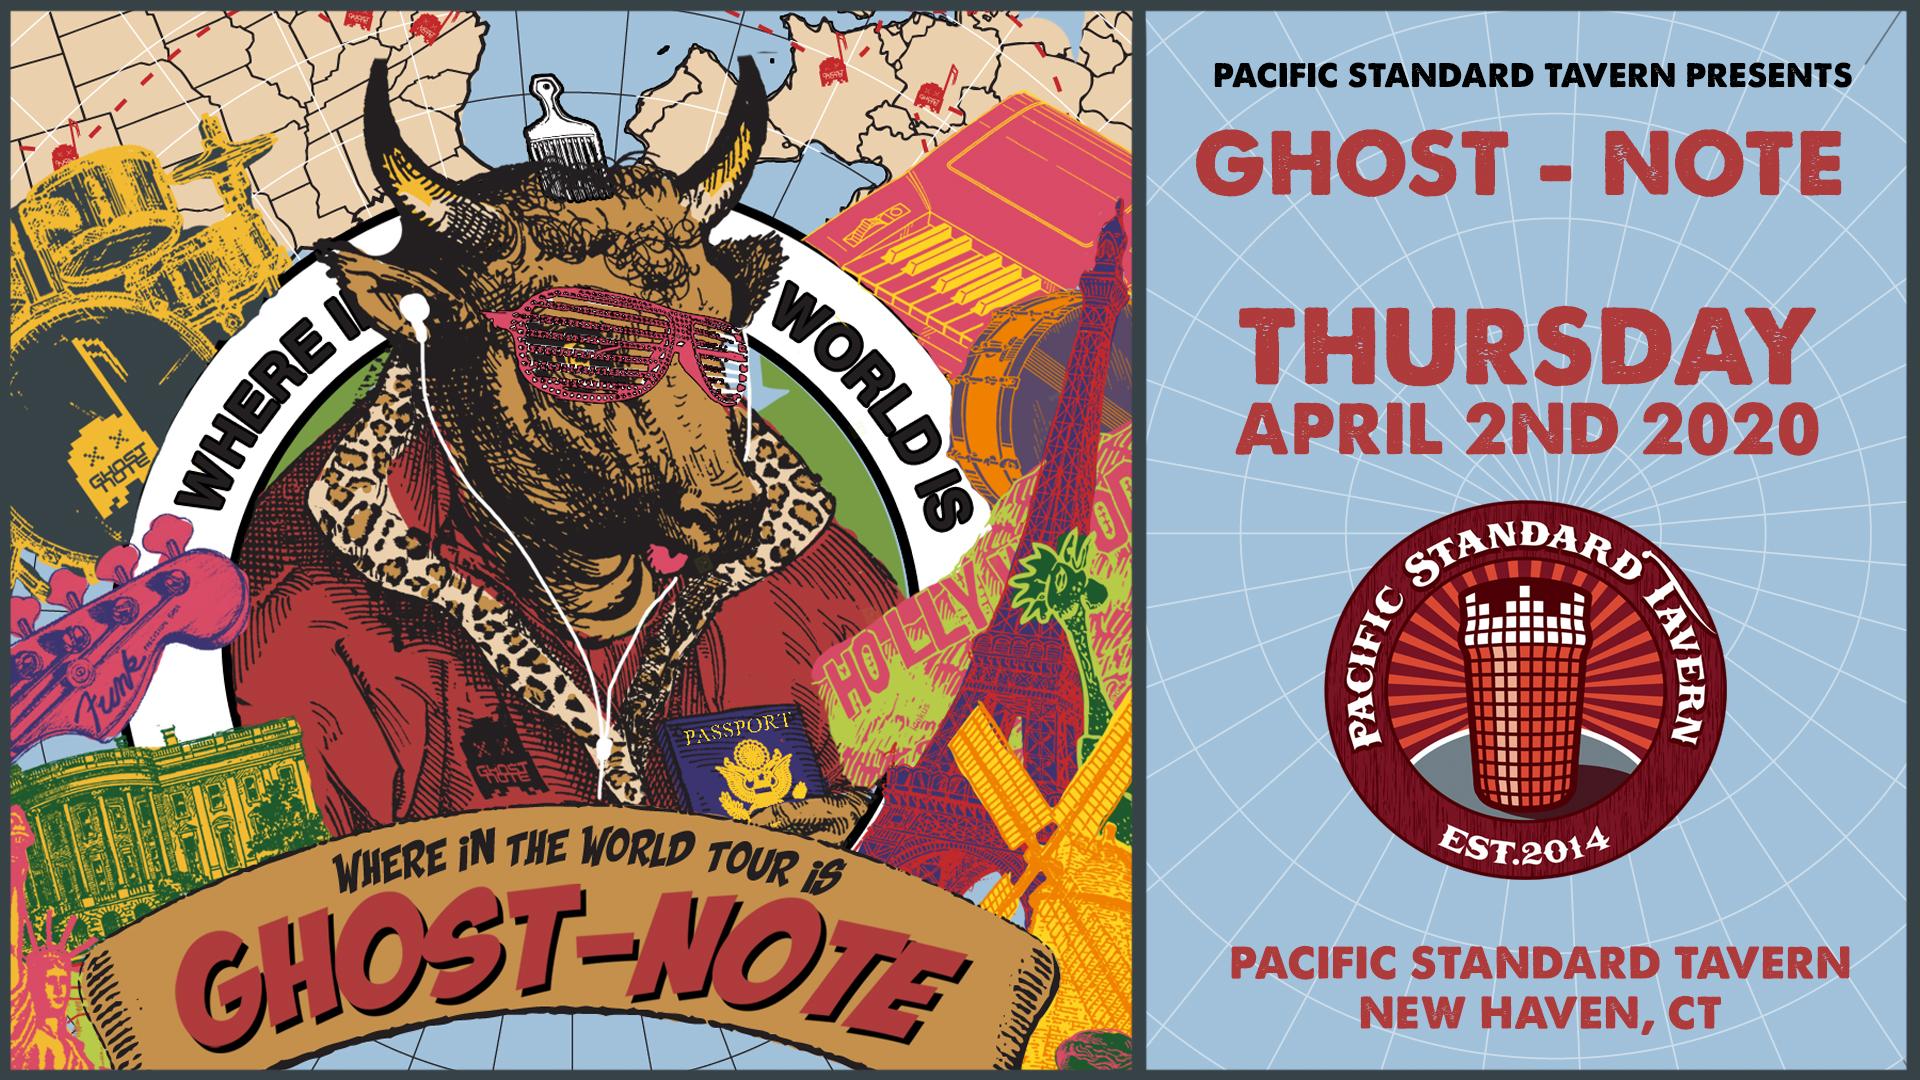 Ghost-Note Thursday, April 2nd 2020 at Pacific Standard Tavern